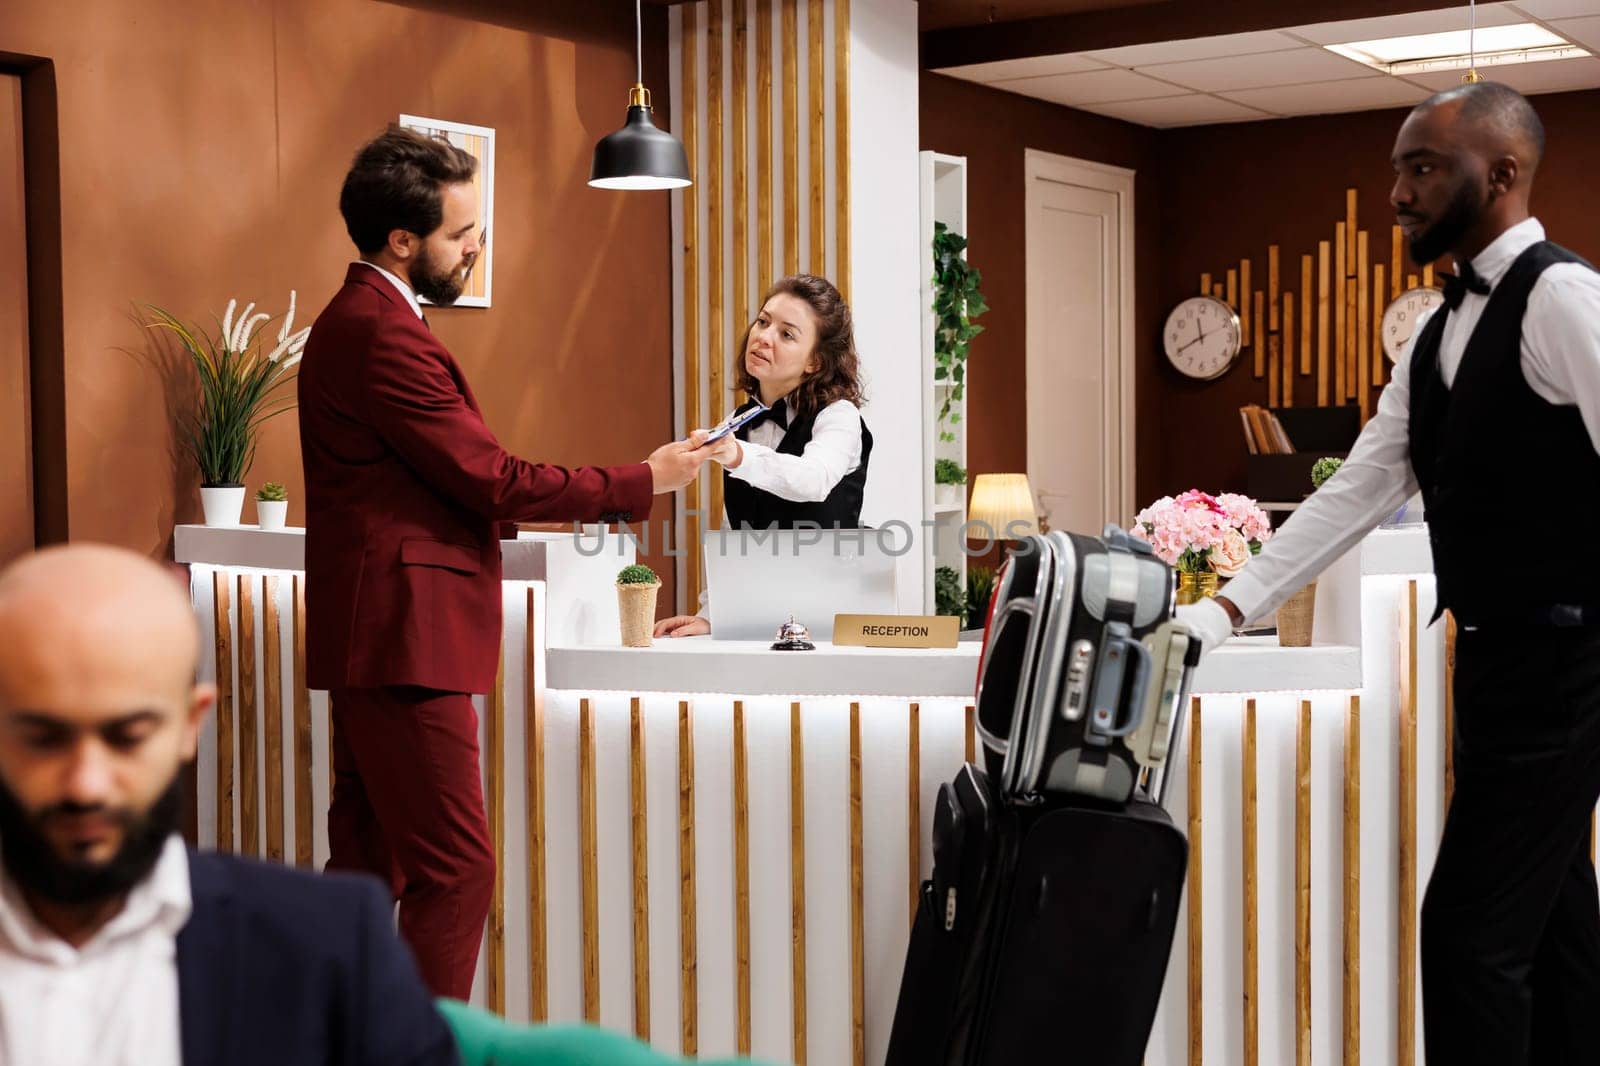 Formal guest fill in registration forms at front desk, doing easy check in process to see room reservation. Businessman travelling for work, receiving great concierge service from staff.